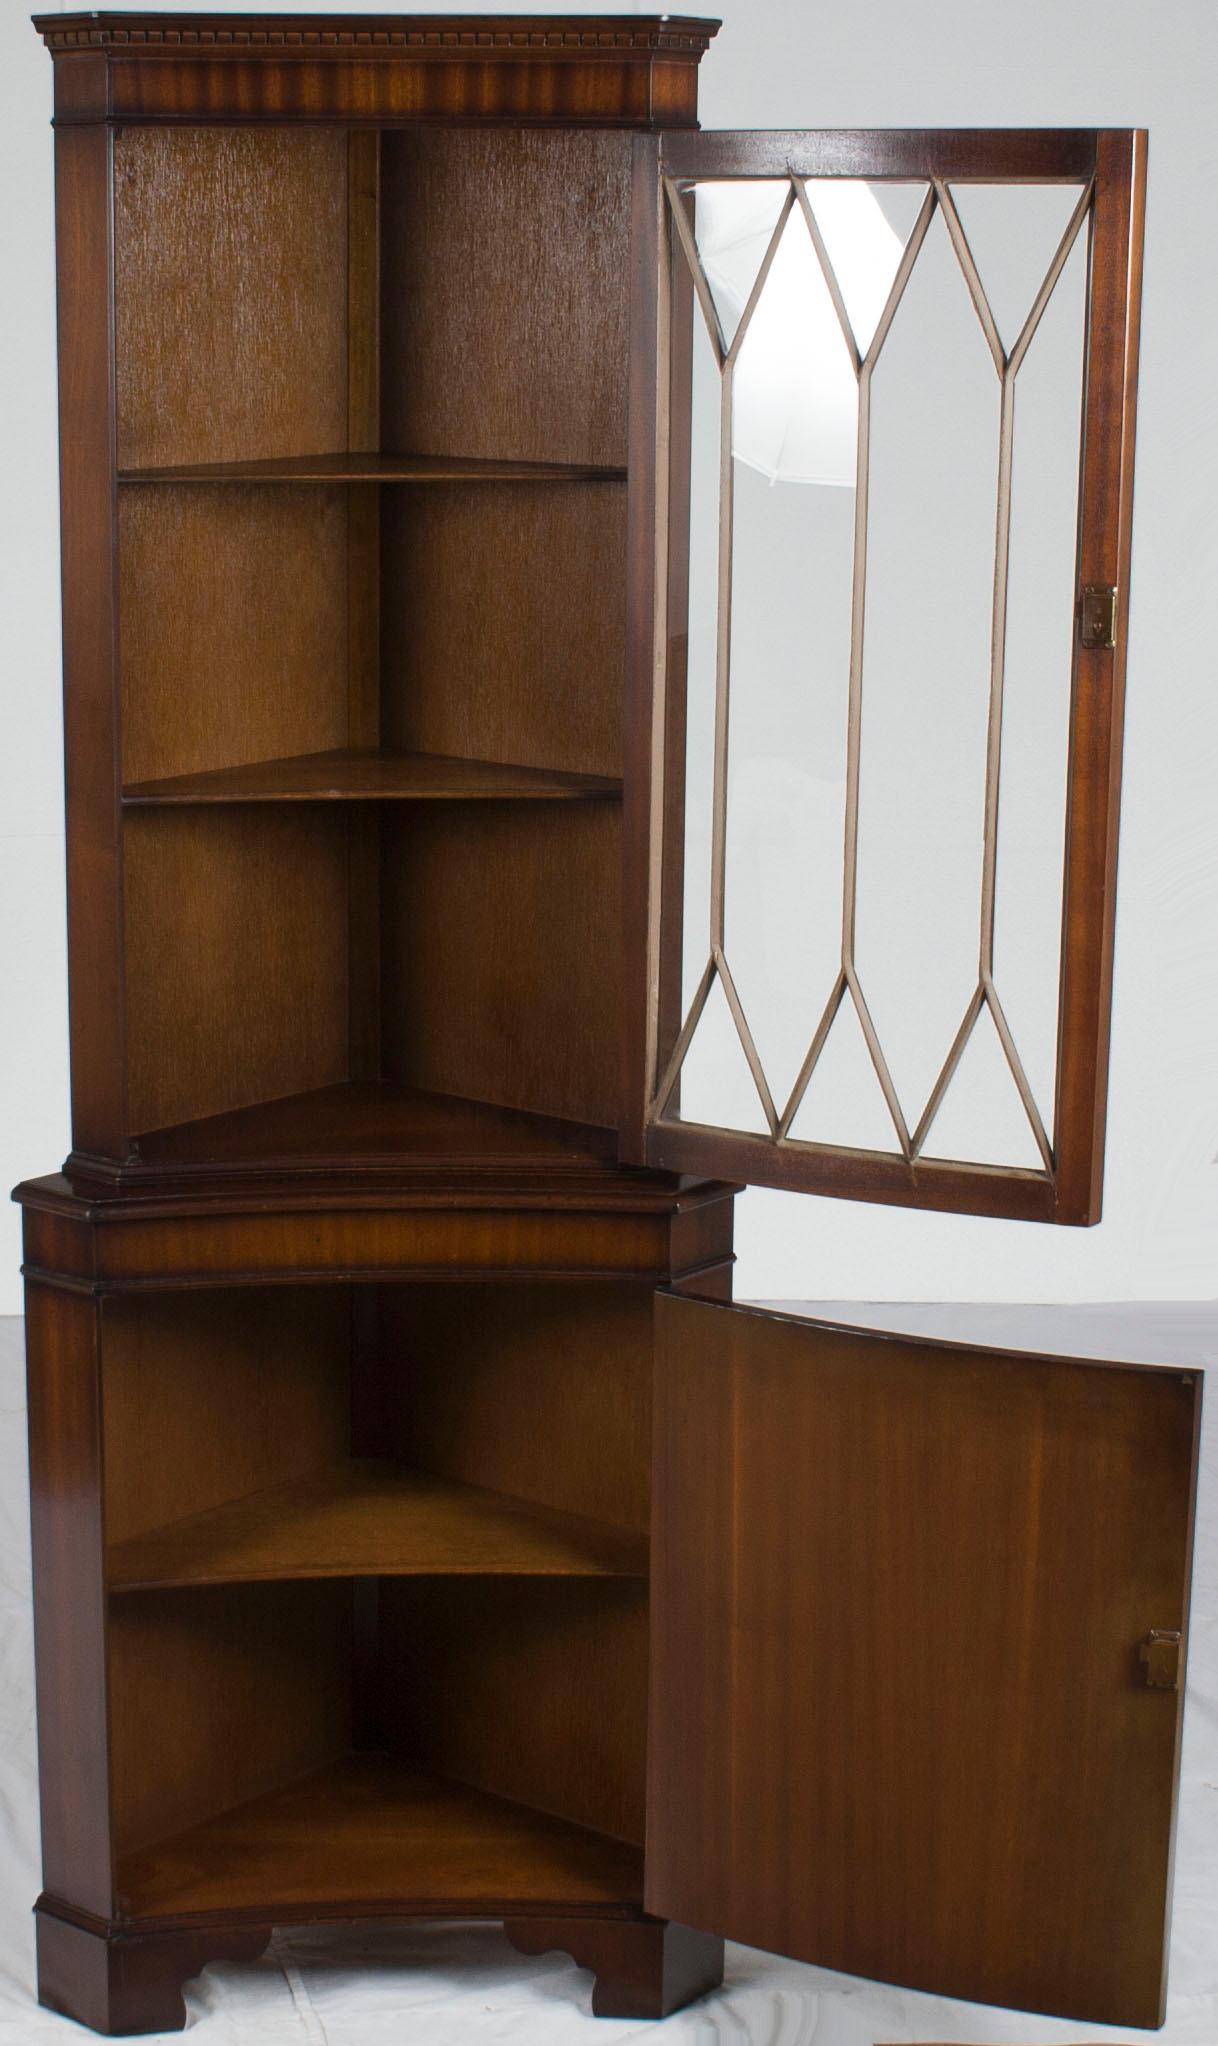 This beautiful antique corner cabinet was English-made around 1960, and today it remains as beautiful as ever. The mahogany displays a fine grain and a rich complexion, particularly on the lower cabinet door where flame mahogany was used. The